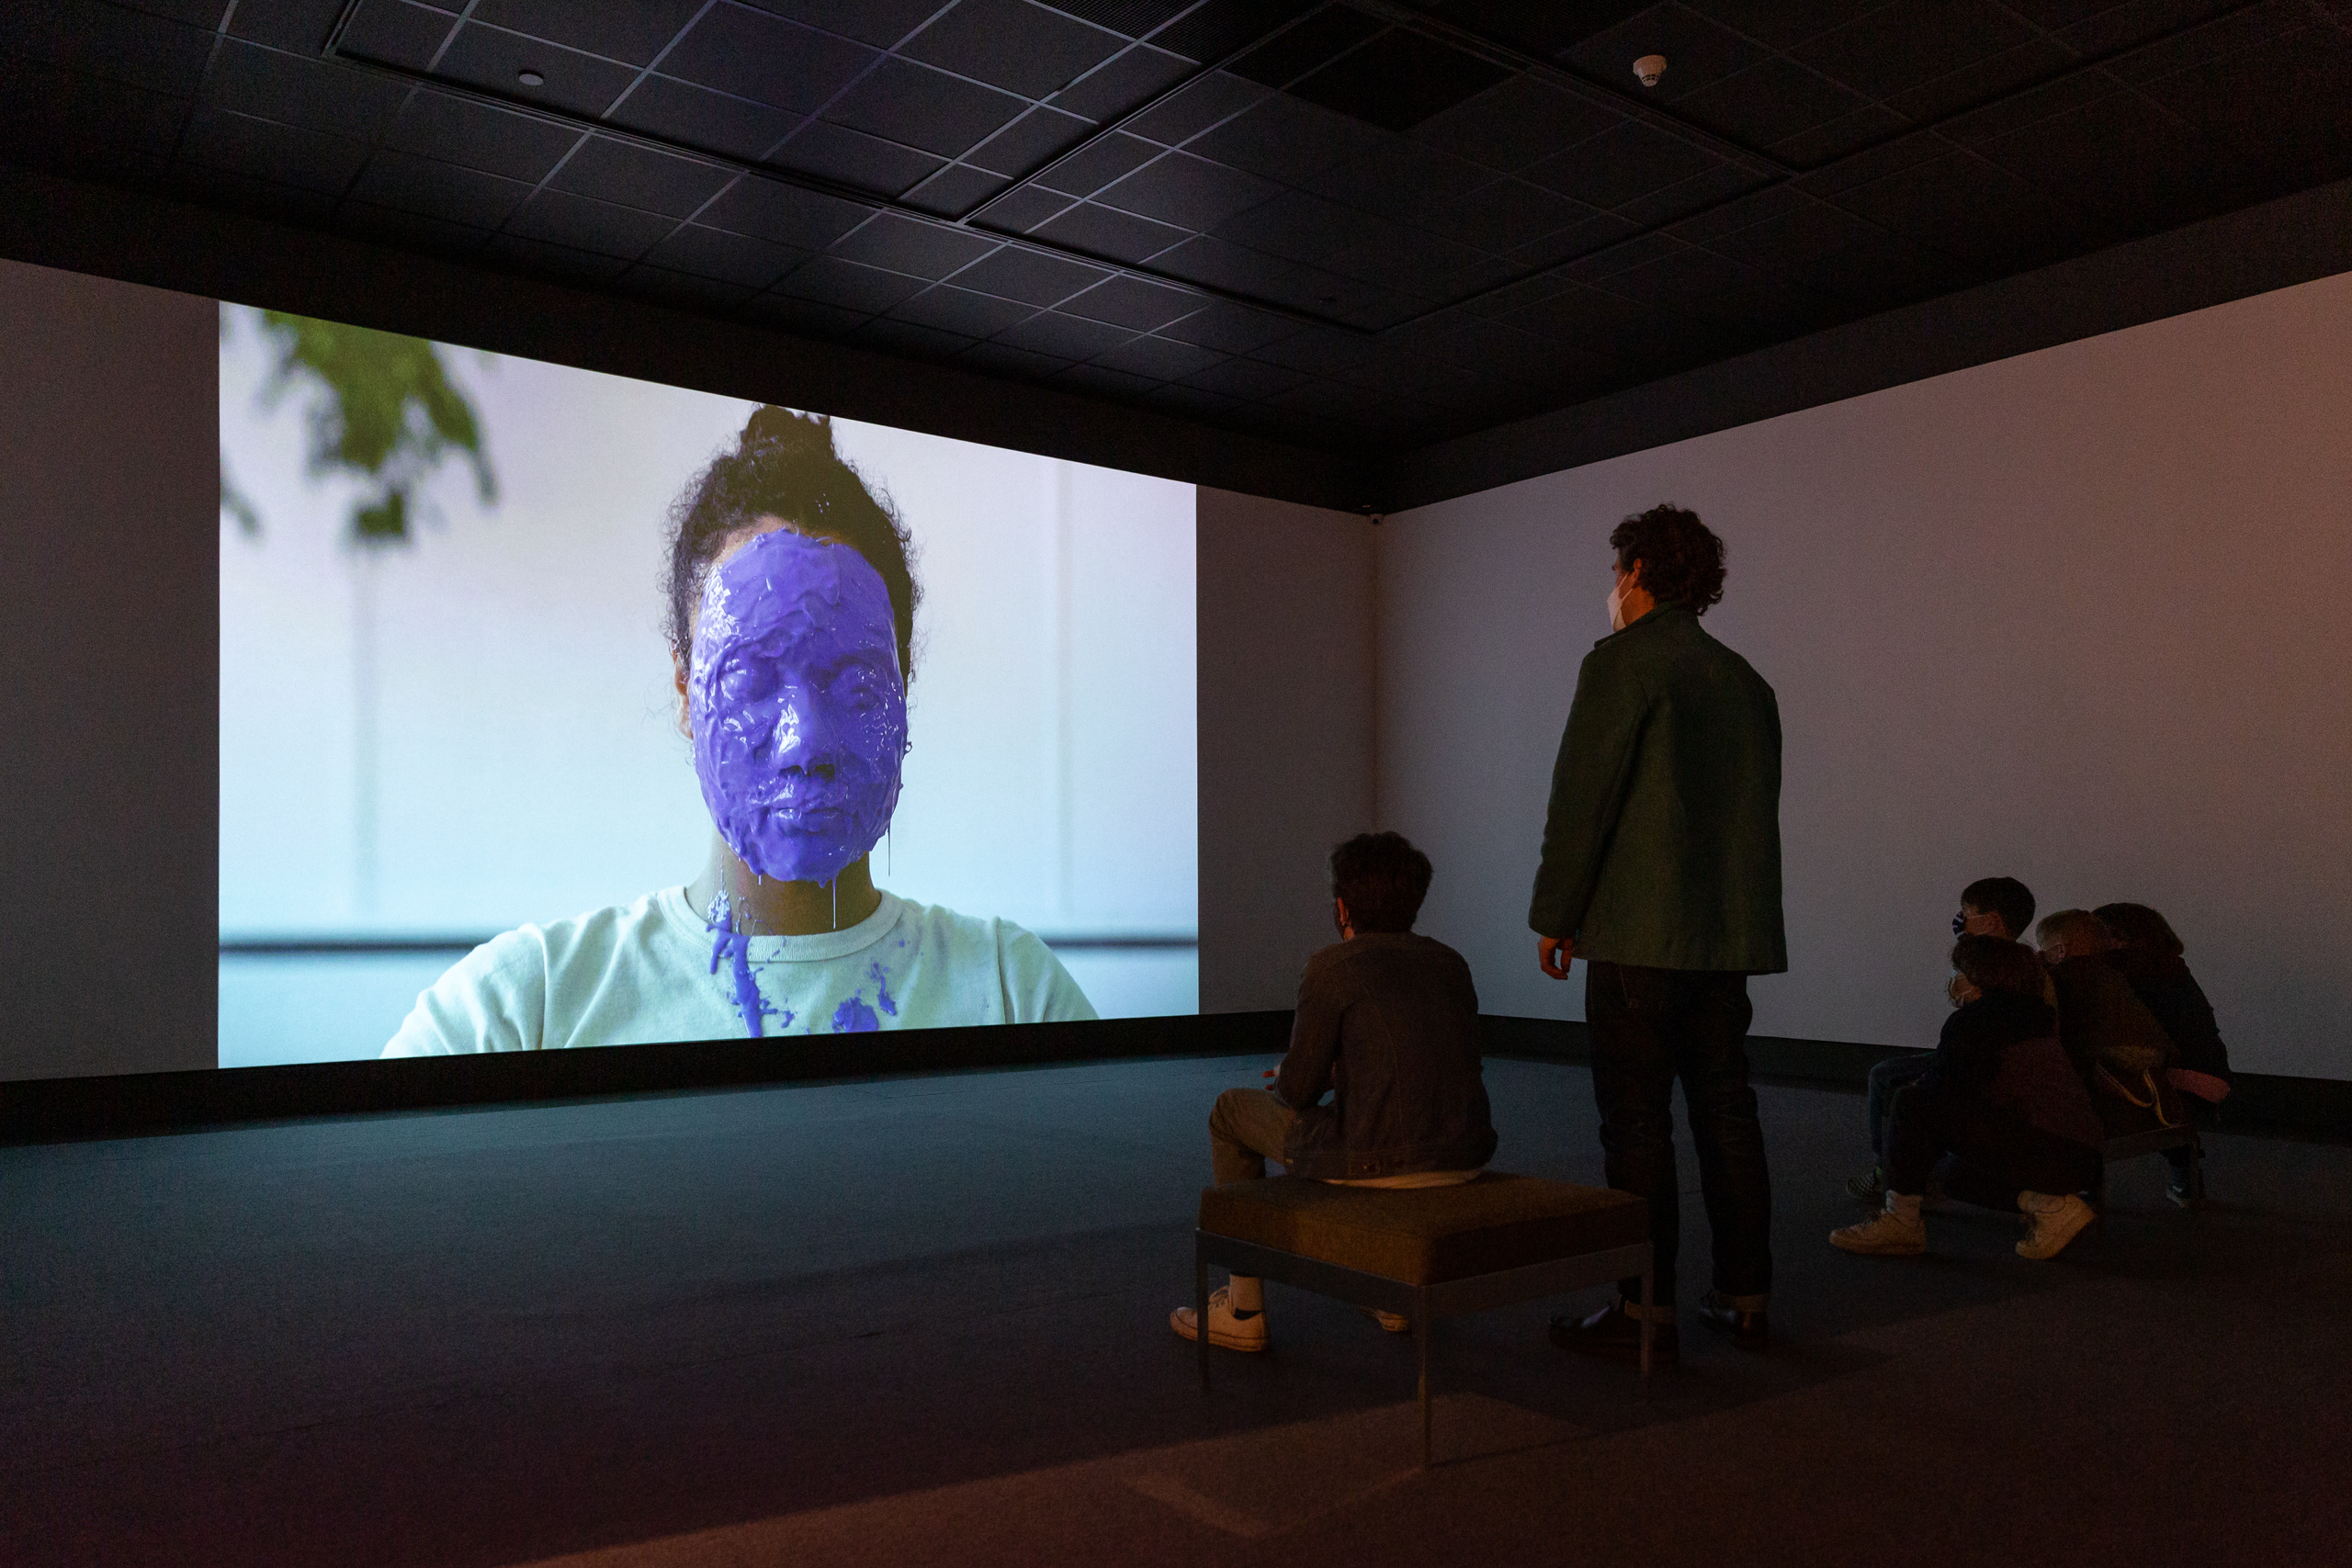 A small group of gallery visitors standing, seated and crouched on a grey carpeted area in front of a large video projection, filling the wall, of a woman in a white t-shirt with purple casting latex covering her face and spattering her clothes